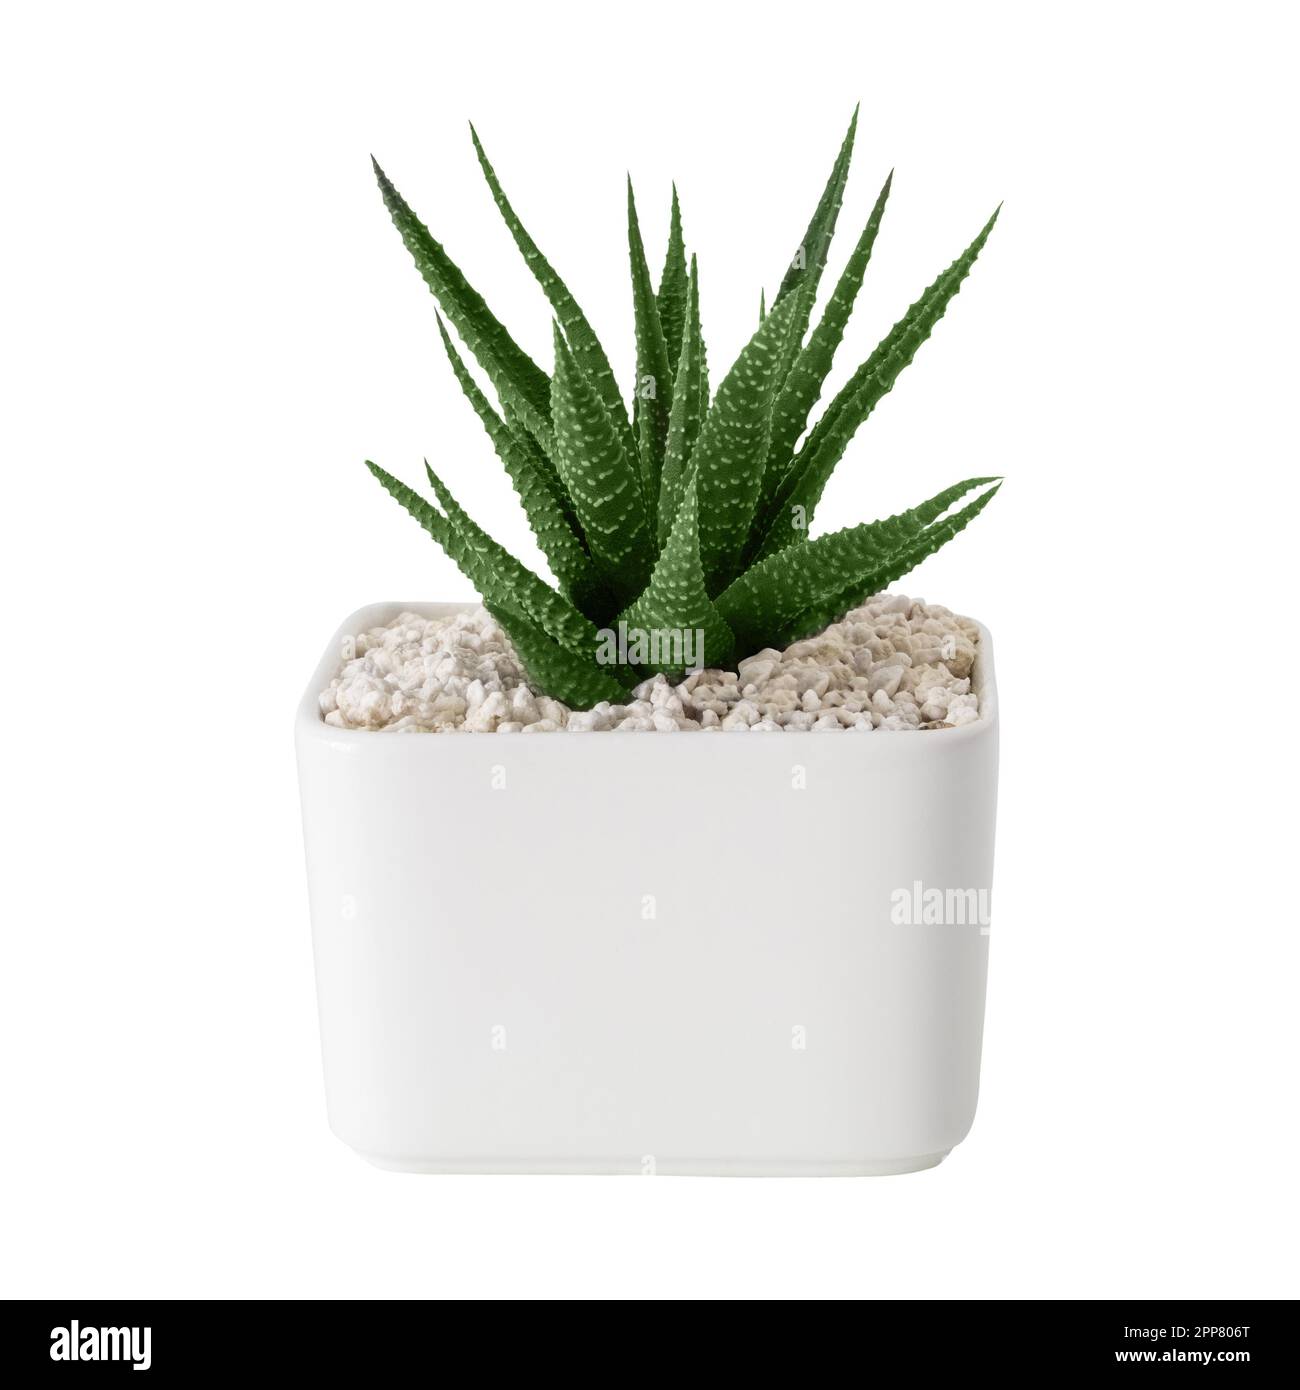 Haworthia succulent close up in a white pot. Isolated. Stock Photo